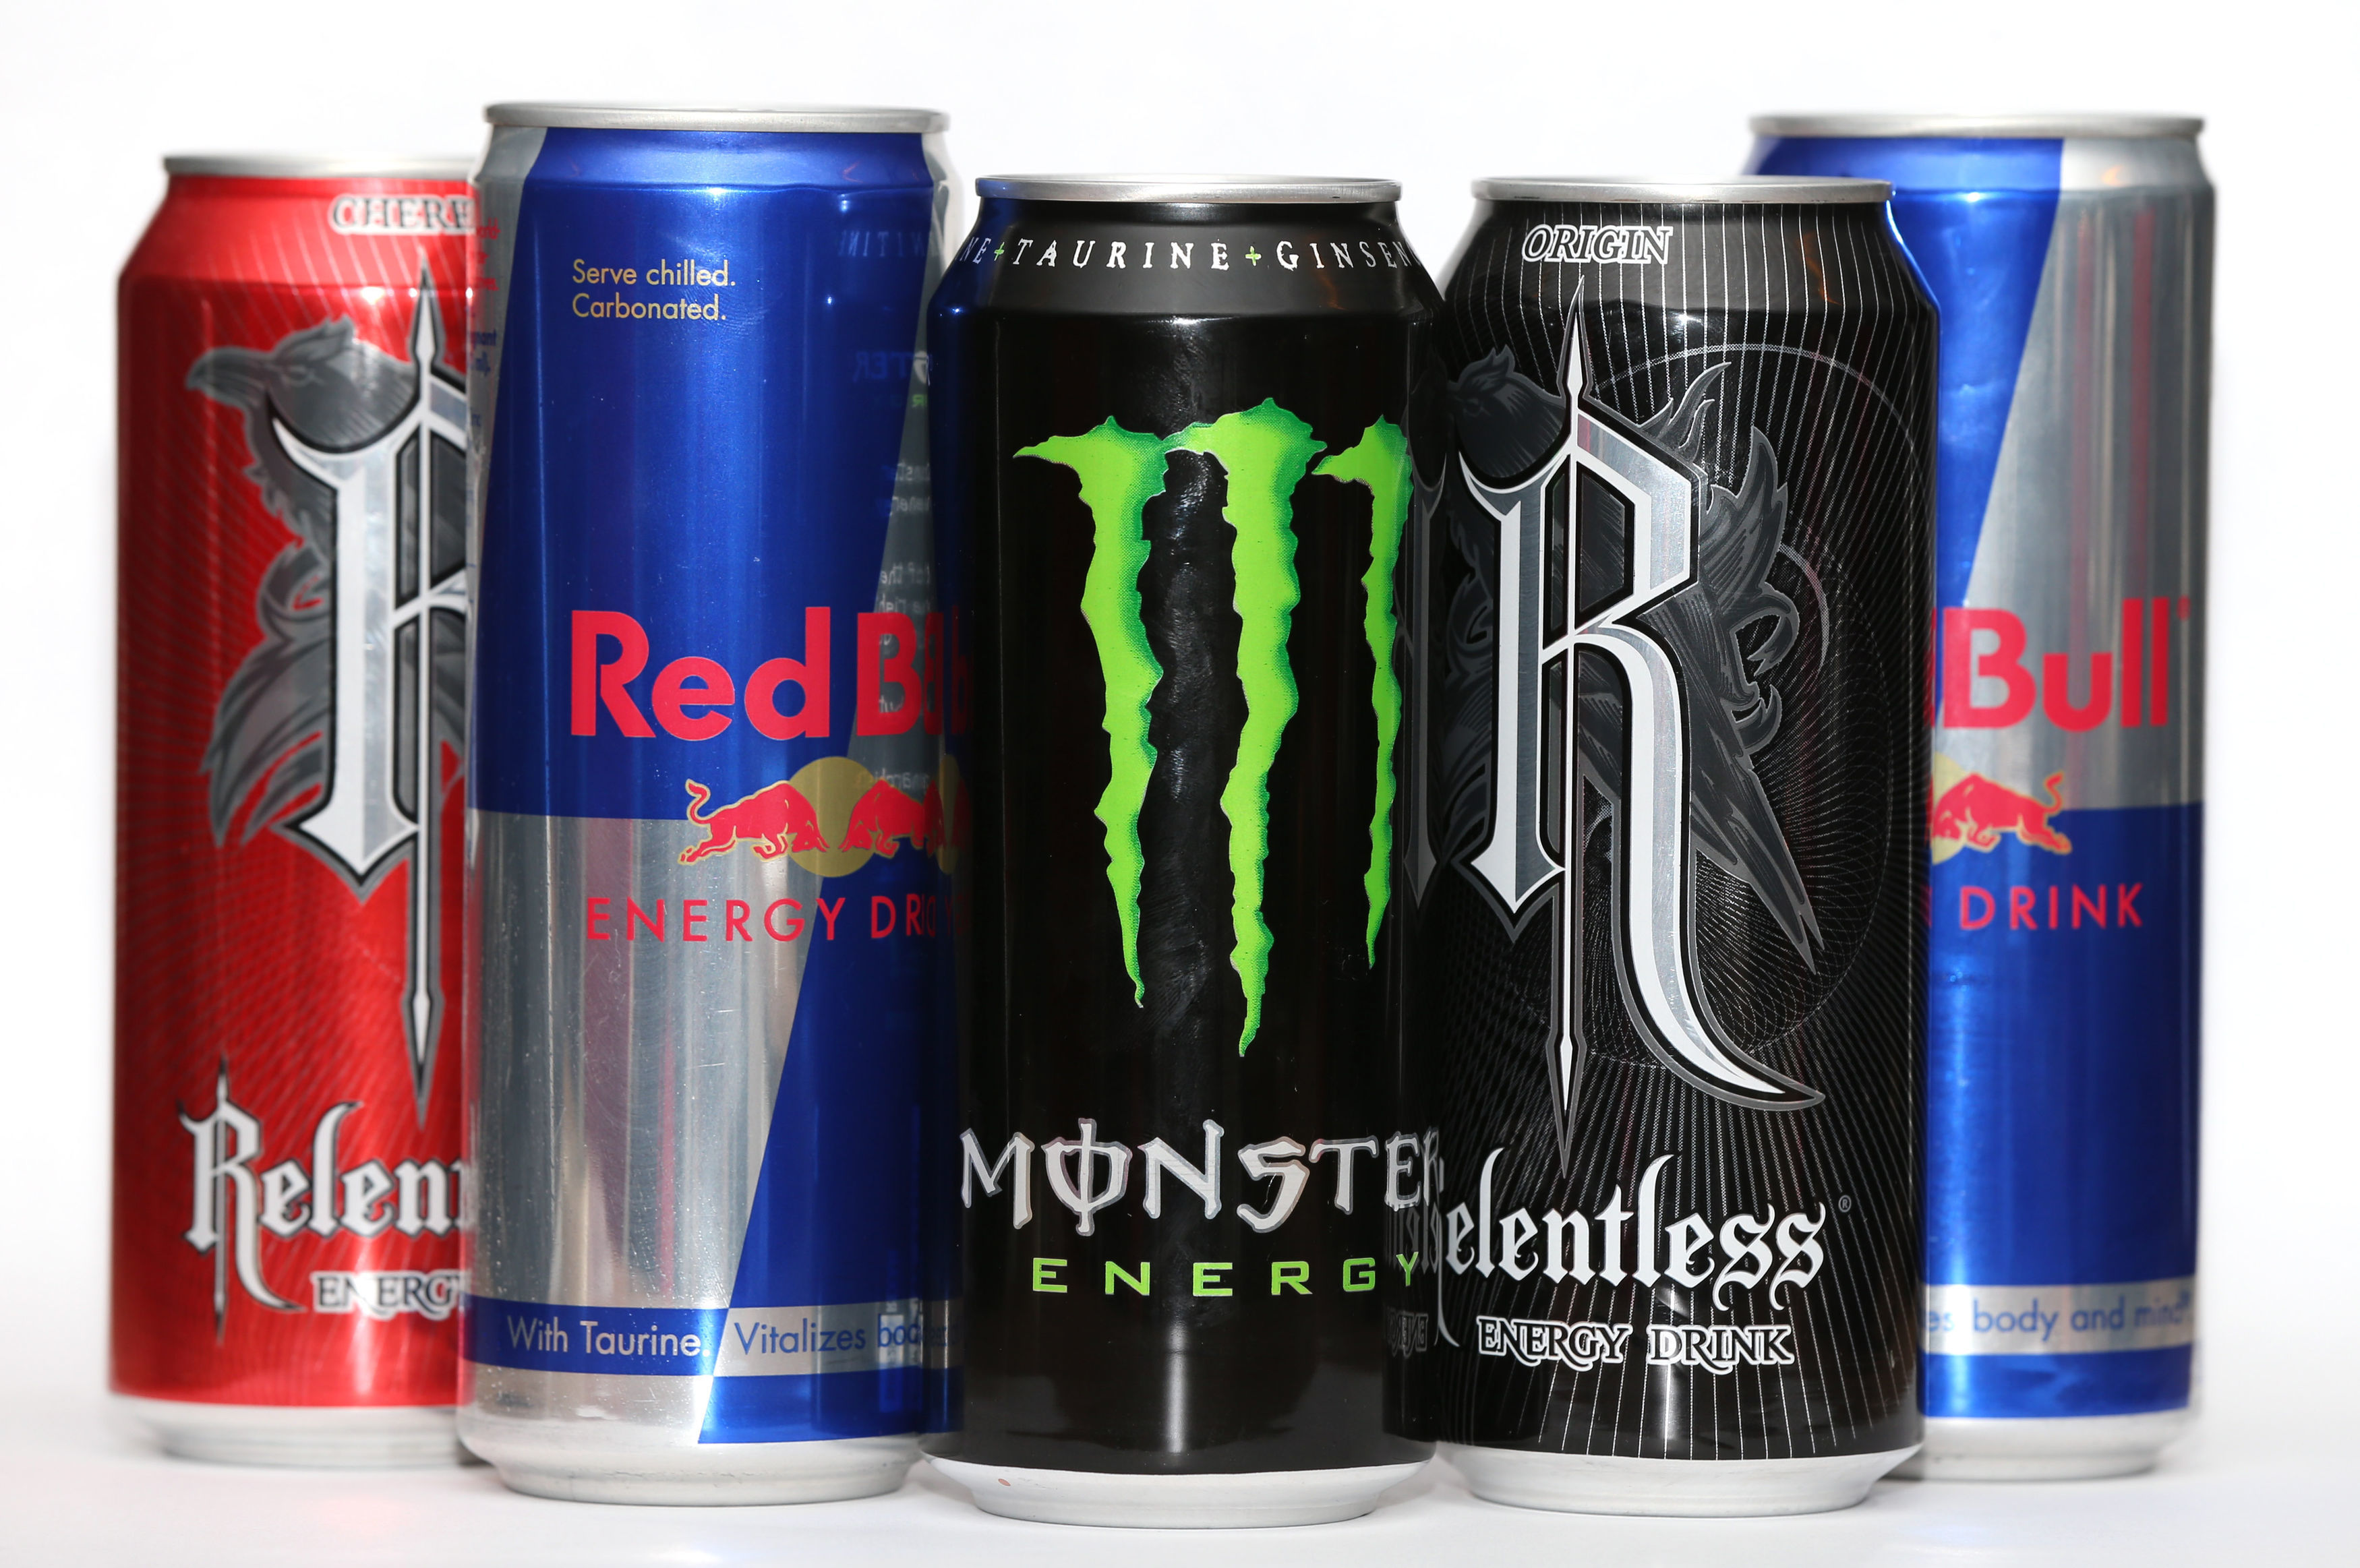 IS A BAN THE ANSWER? COUNTDOWN TO BAN SALES OF ENERGY DRINKS TO UNDER